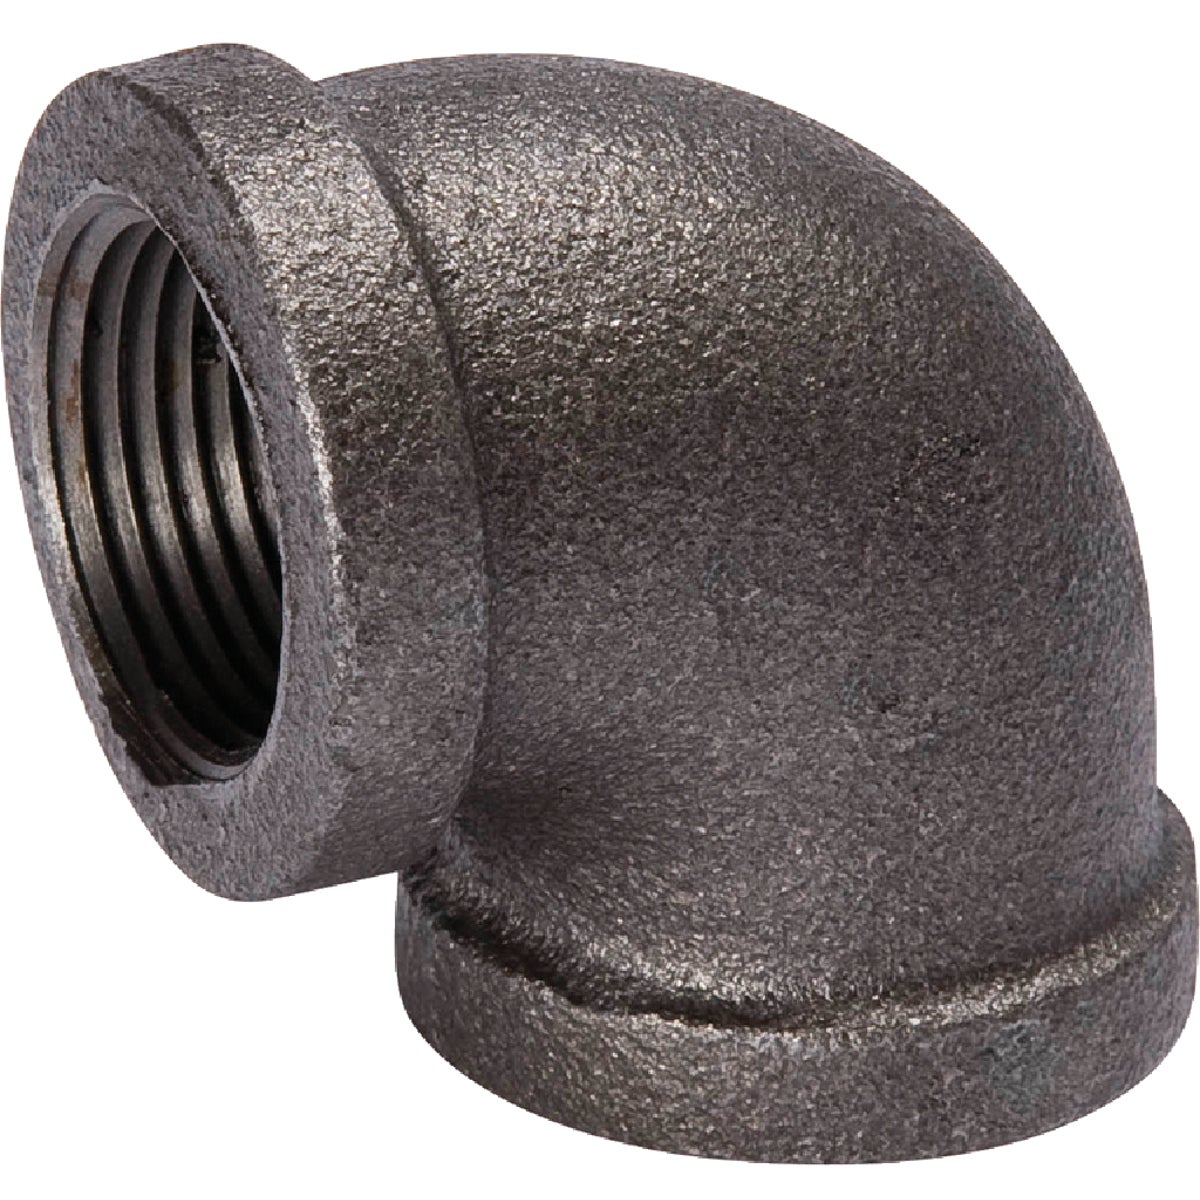 Southland 1/4 In. 90 Deg. Malleable Black Iron Elbow (1/4 Bend)